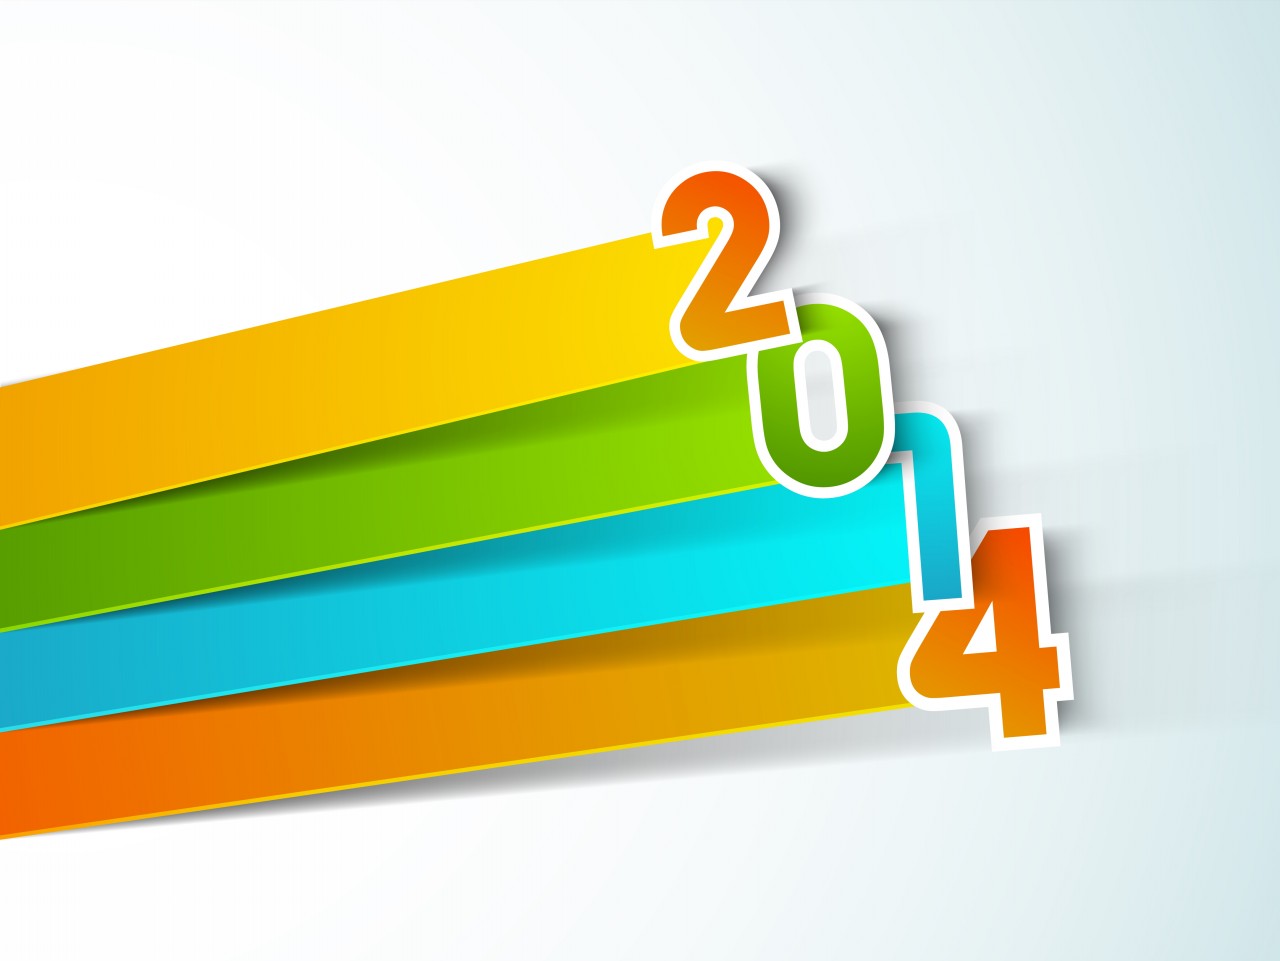 Celebrate New Year 2014 Design Free PPT Backgrounds for your ...